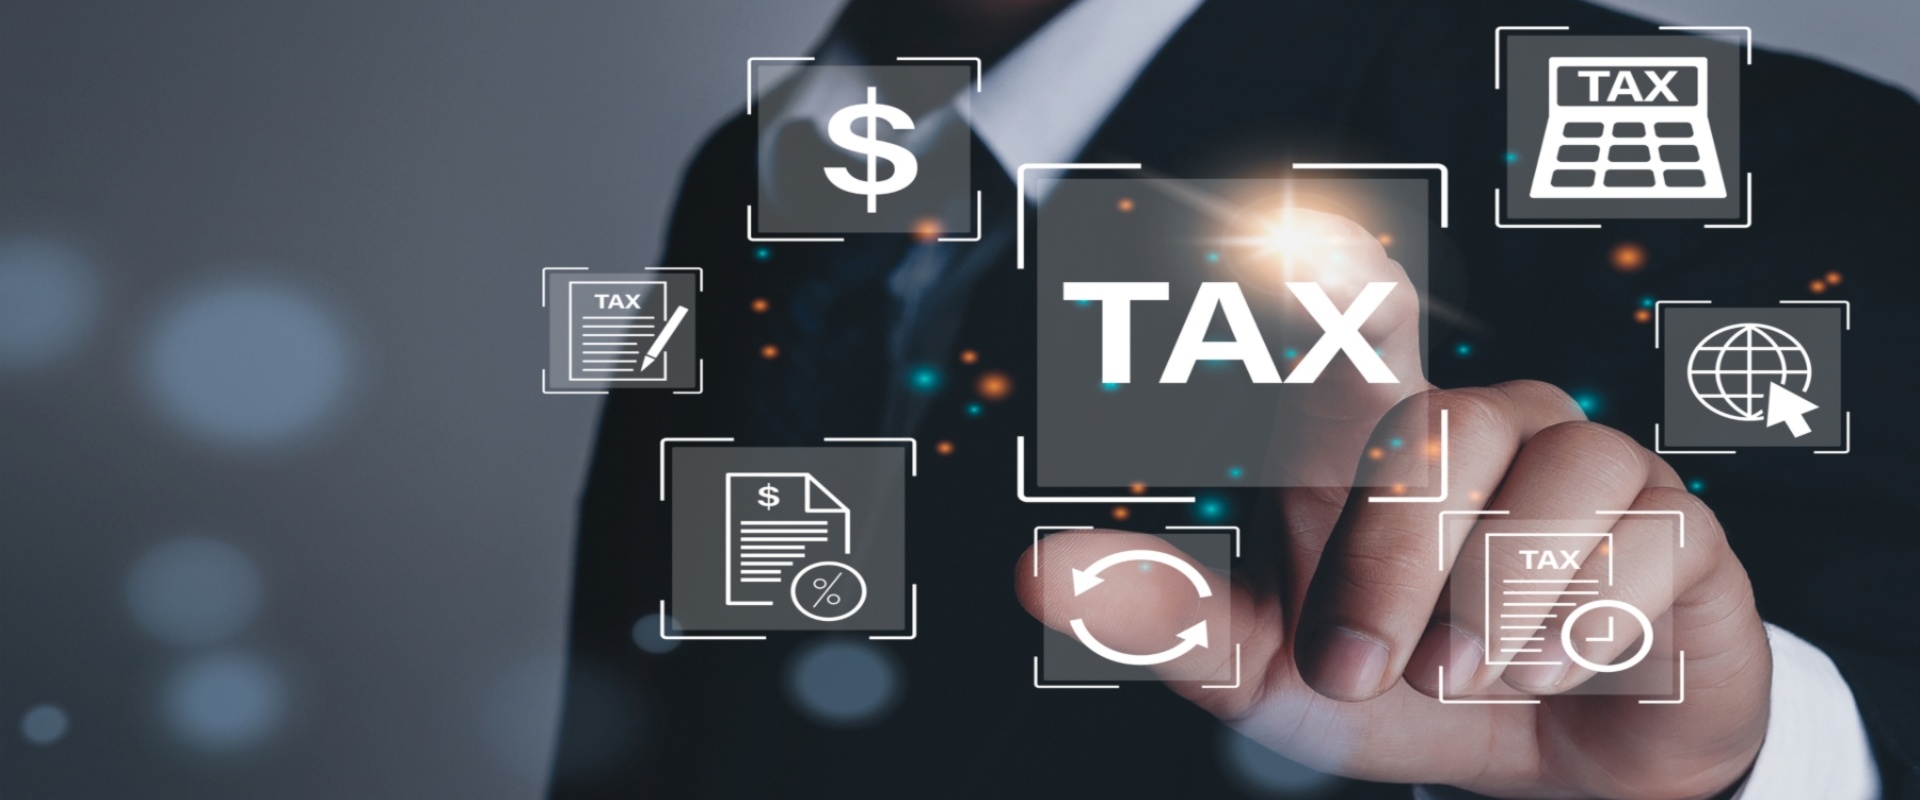 Business hand clicks virtual screen to tax return online for tax payment by corporations such as VAT, income tax, and property tax.